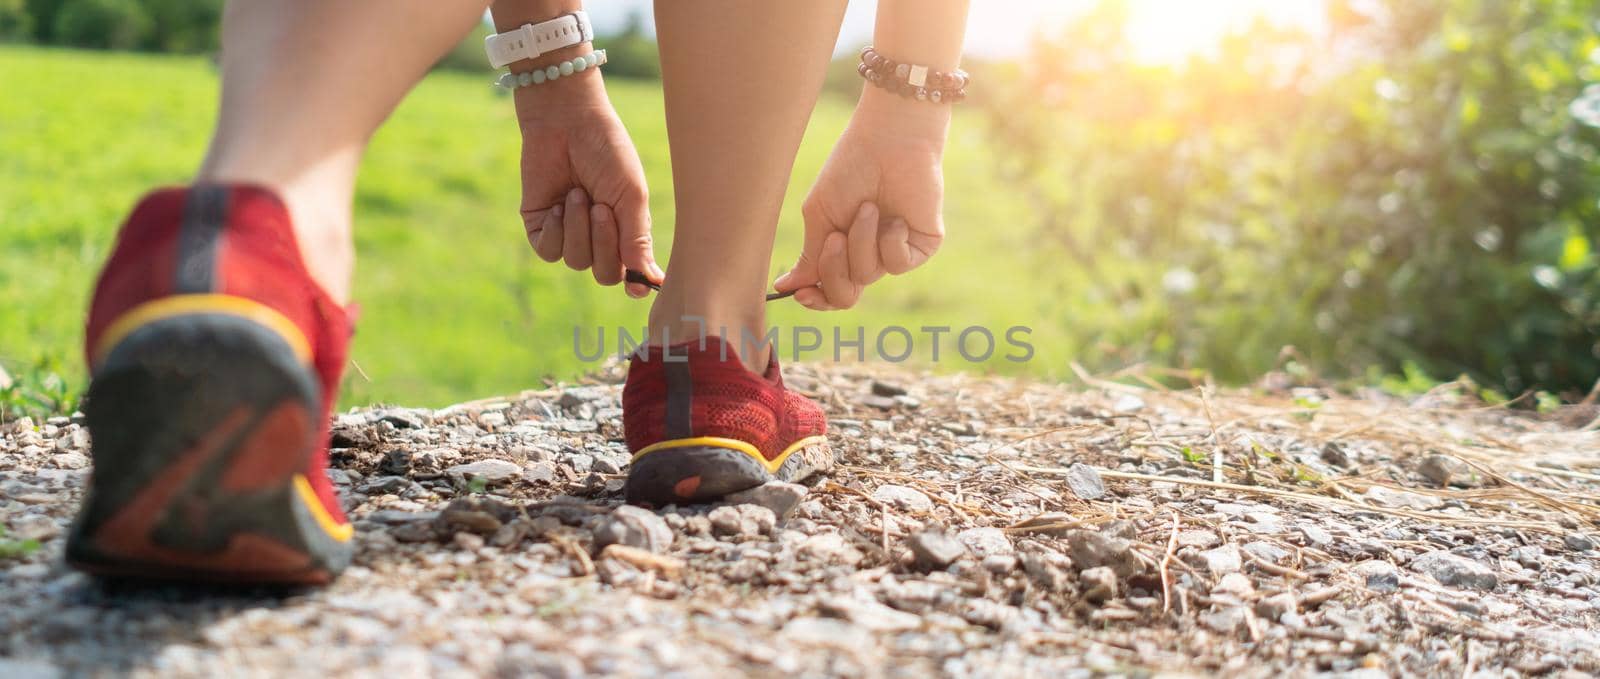 Woman wear running shoe on to walking and running on nature green background.Health exercise concept.